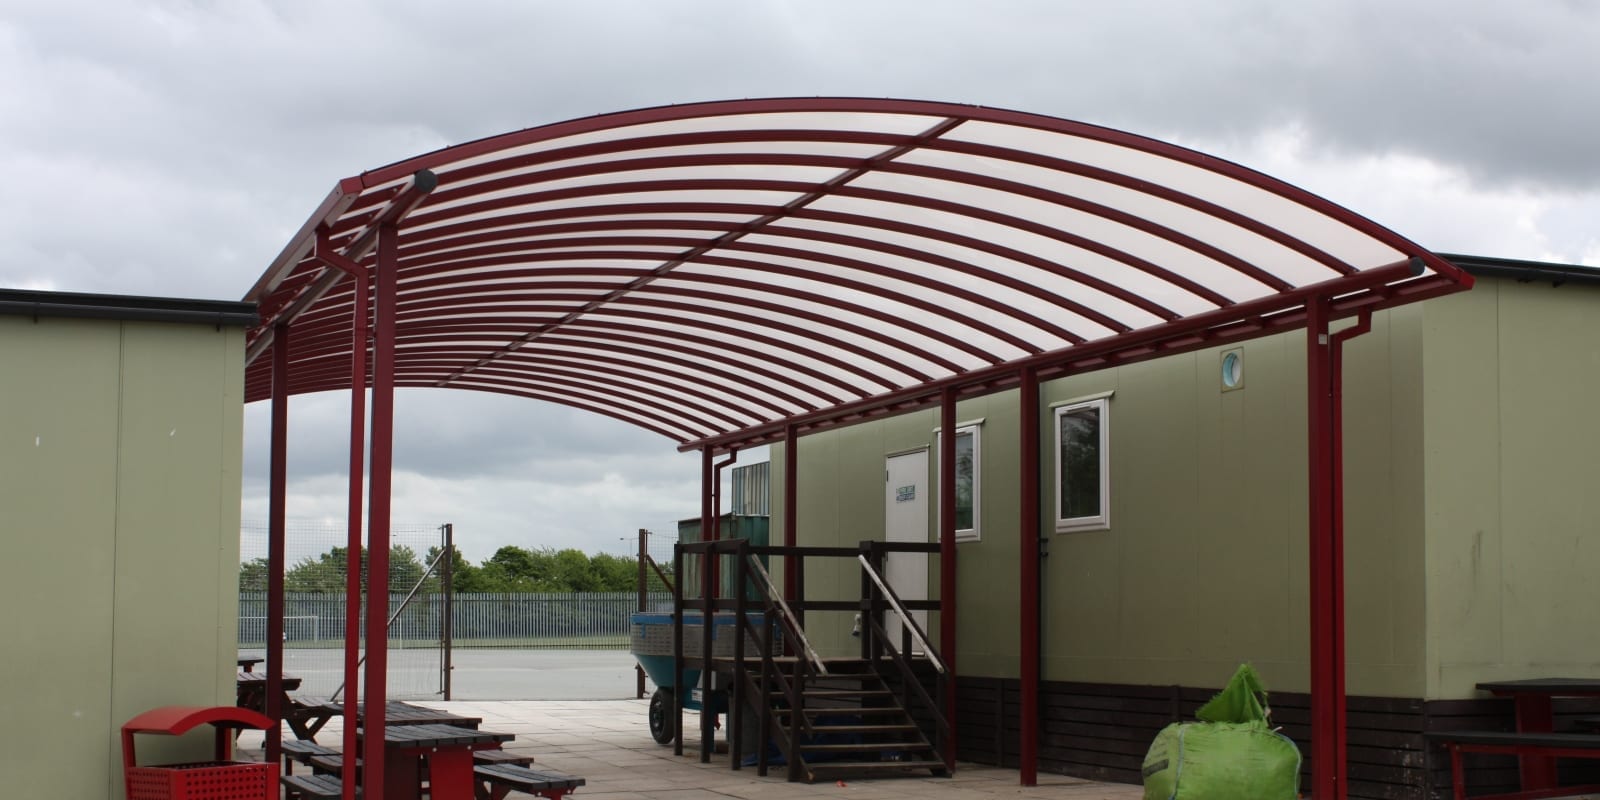 St Peter's High School Curved Roof Shelter